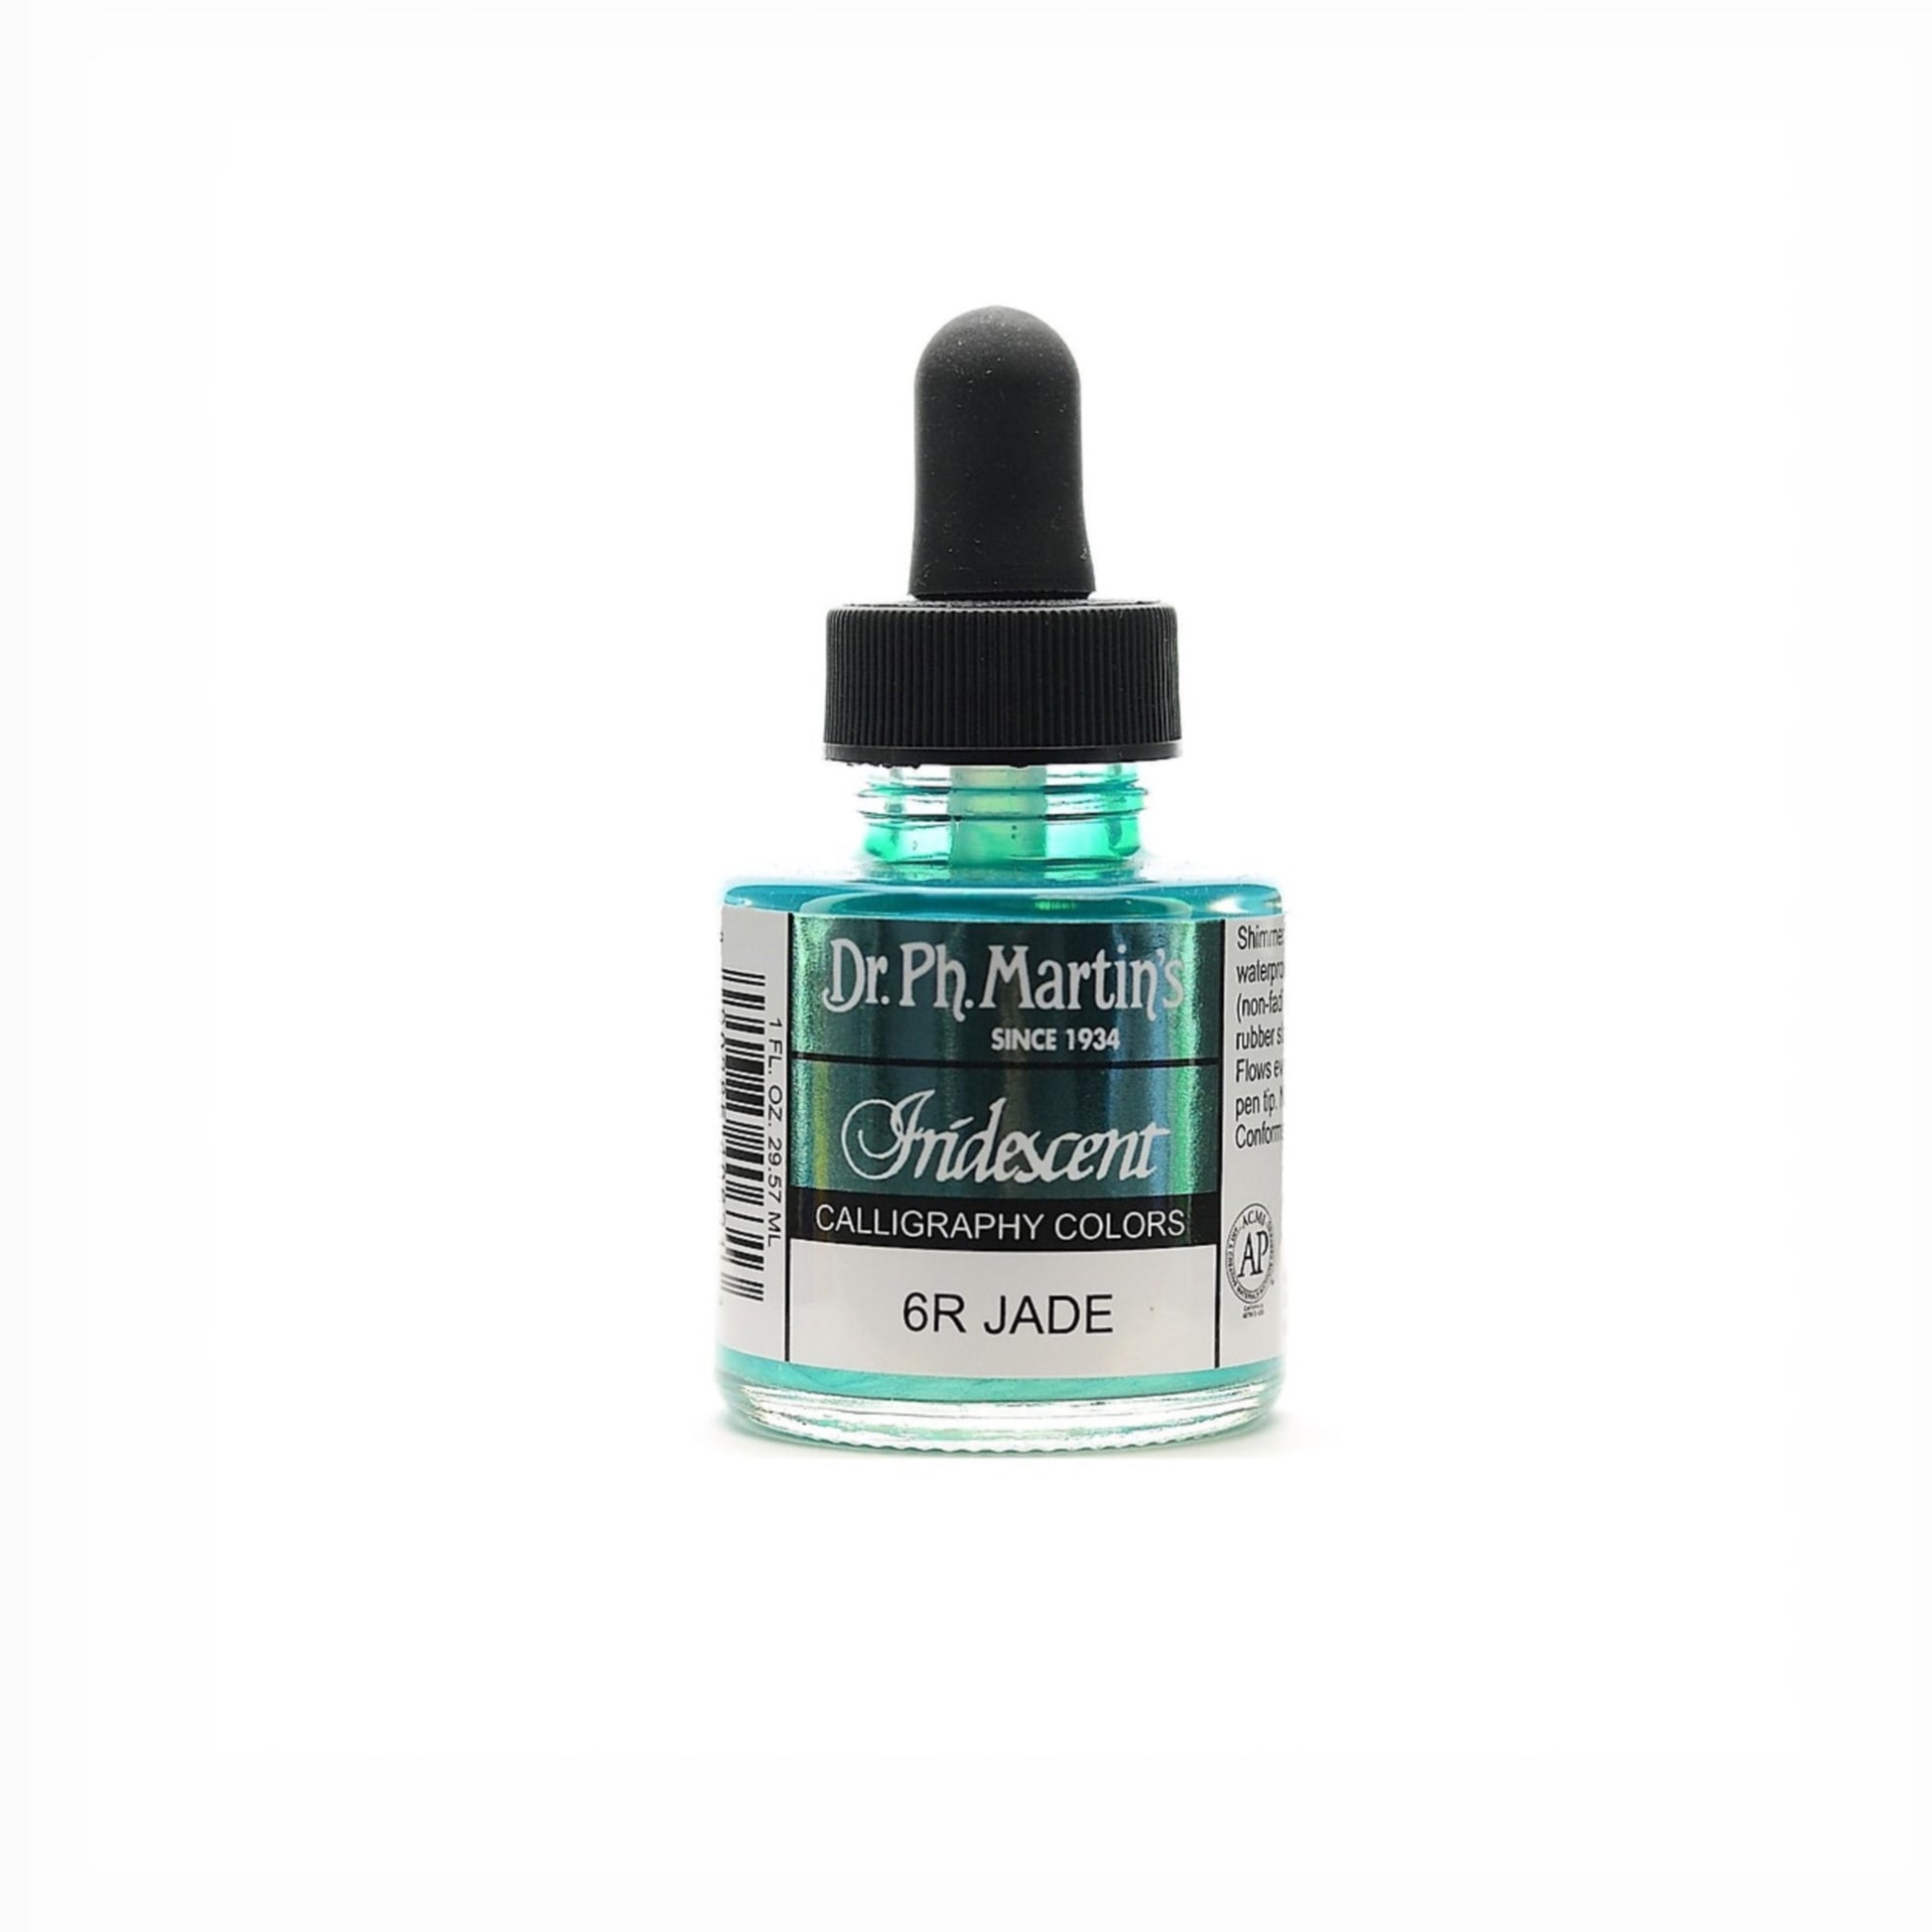 Dr. Ph. Martin's Iridescent Calligraphy Colors - Jade by Dr. Ph. Martin’s - K. A. Artist Shop